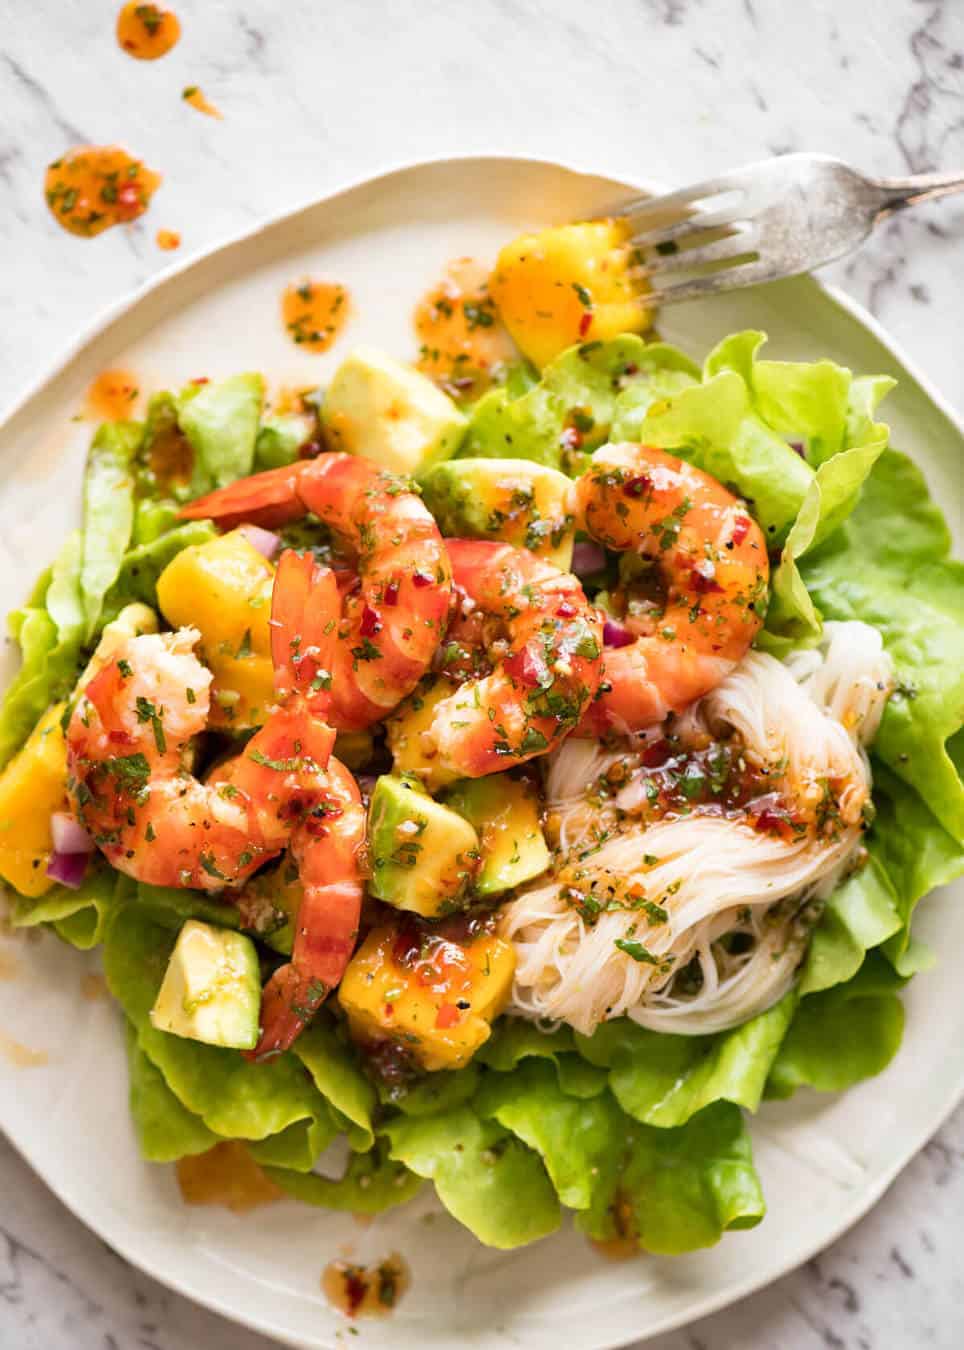 This Prawn, Mango and Avocado Salad with Noodles is perfect for balmy summer days. Great no cook meal! www.recipetineats.com